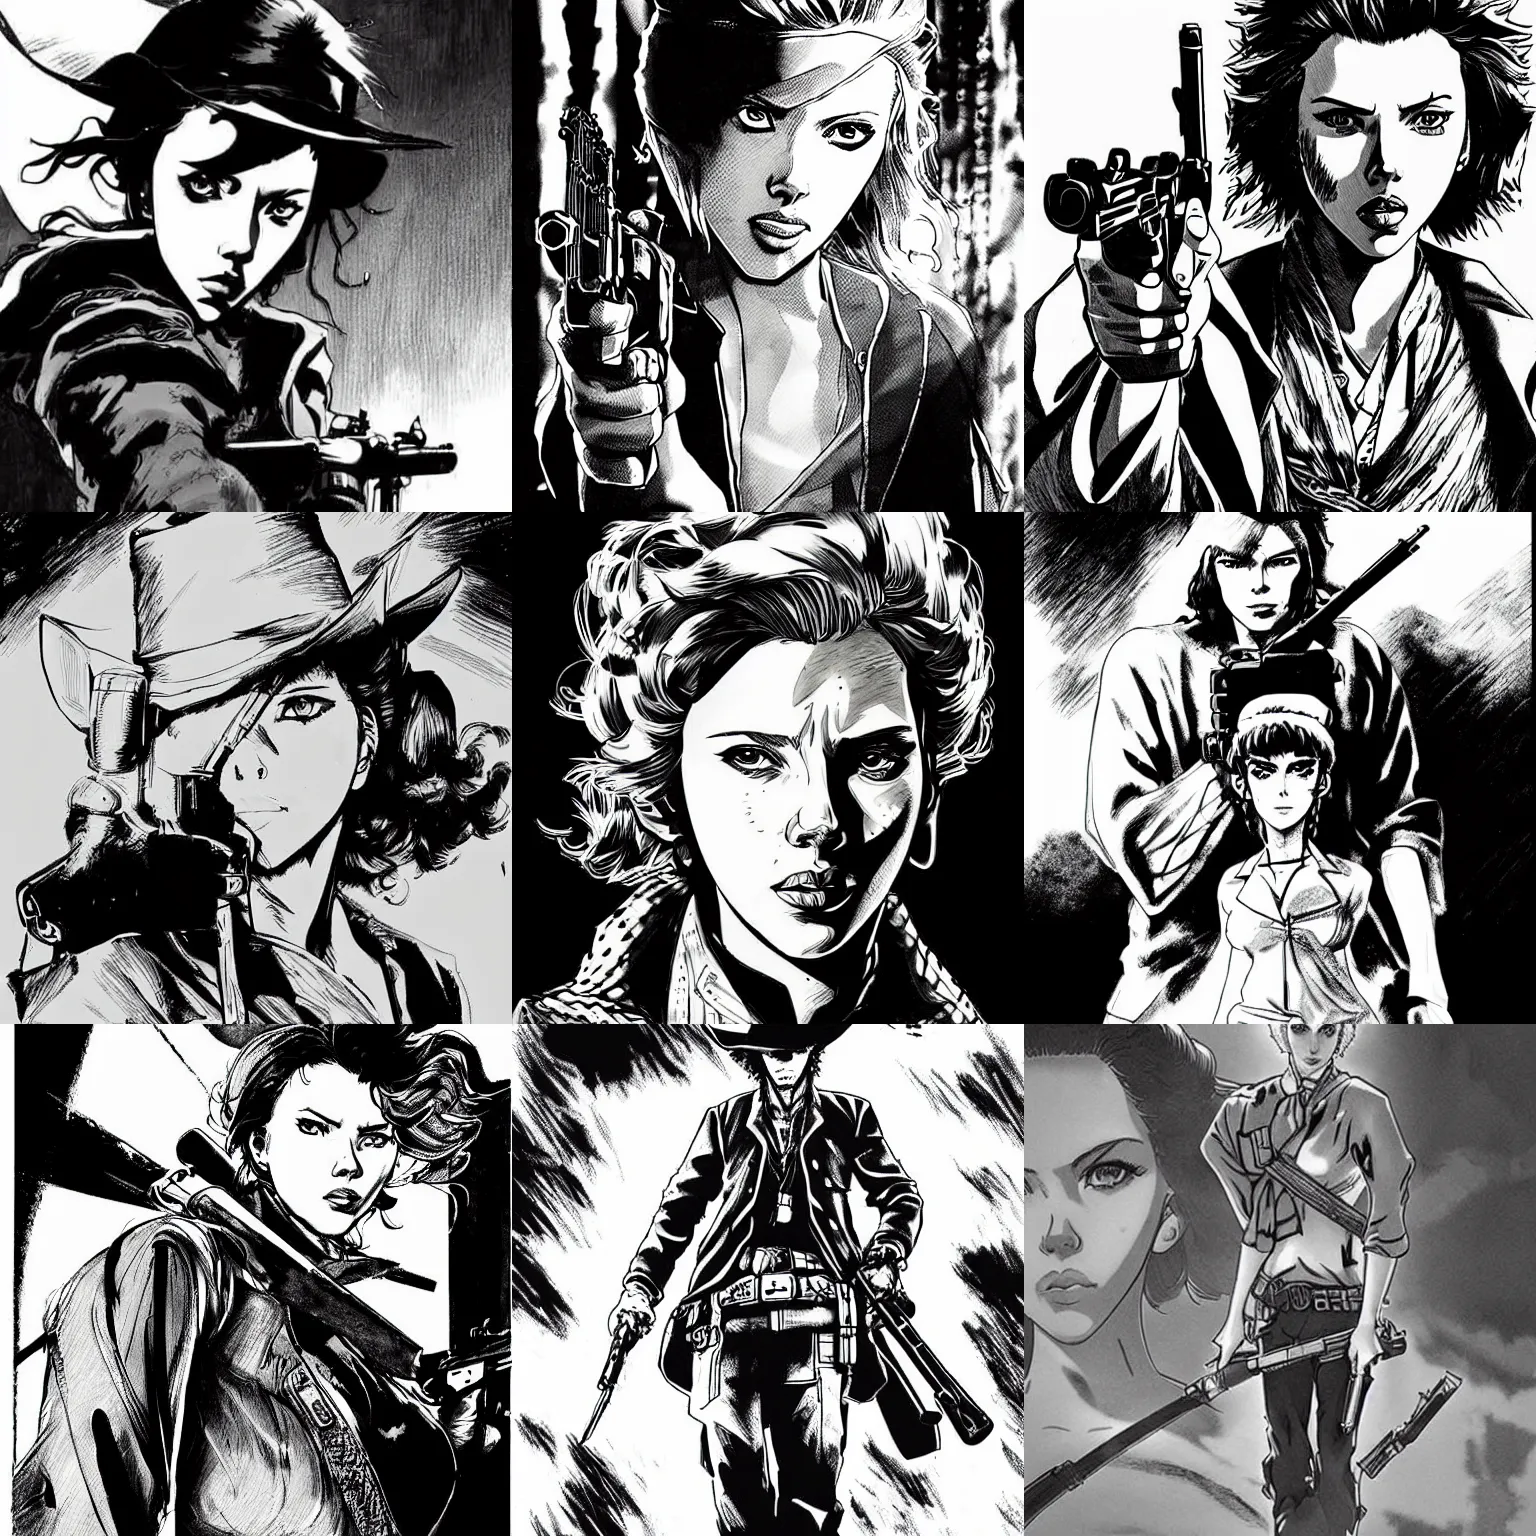 Prompt: scarlett johansson as a gunslinger clint eastwood in afro samurai manga style, pencil and ink, walking the wild west wastelands